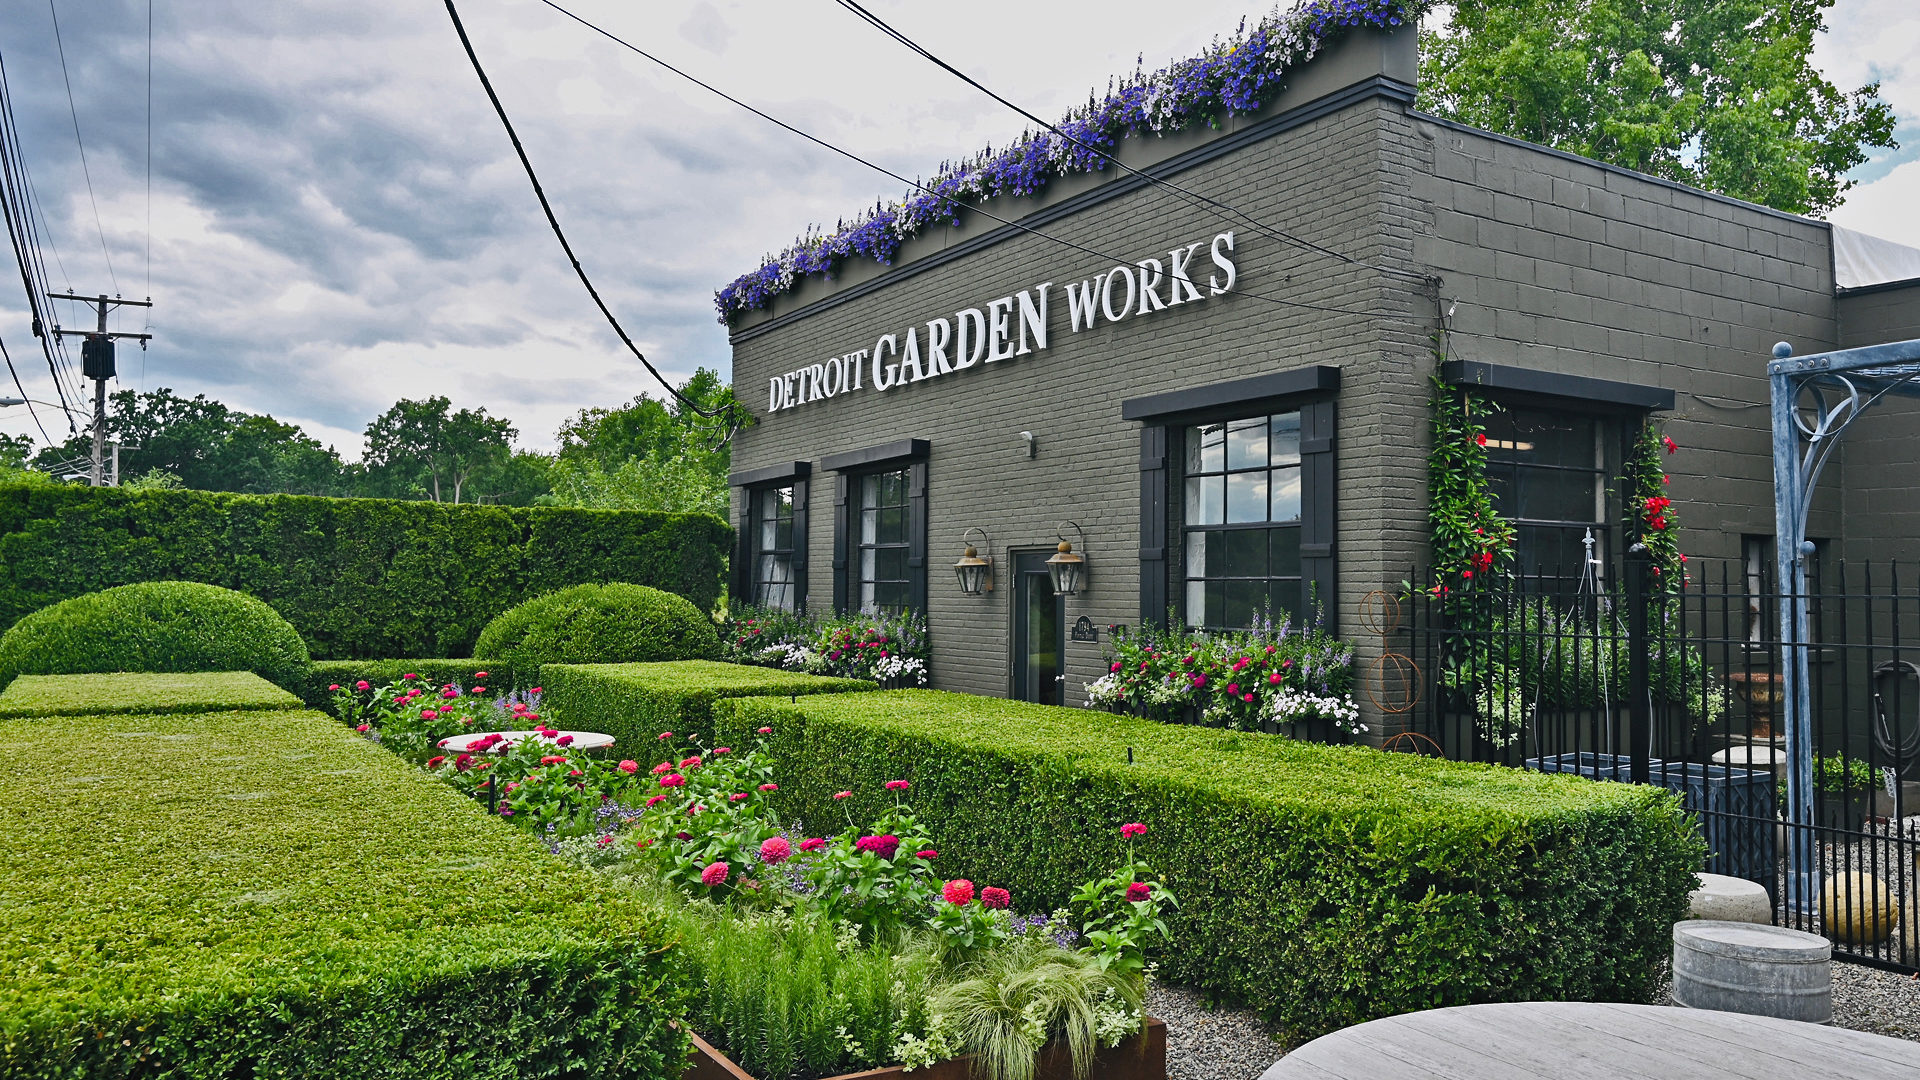 Detroit Garden Works is One of America's Finest Purveyors of Antique, Vintage & Contemporary Garden Ornament From all Over the World - Detroit Garden Works